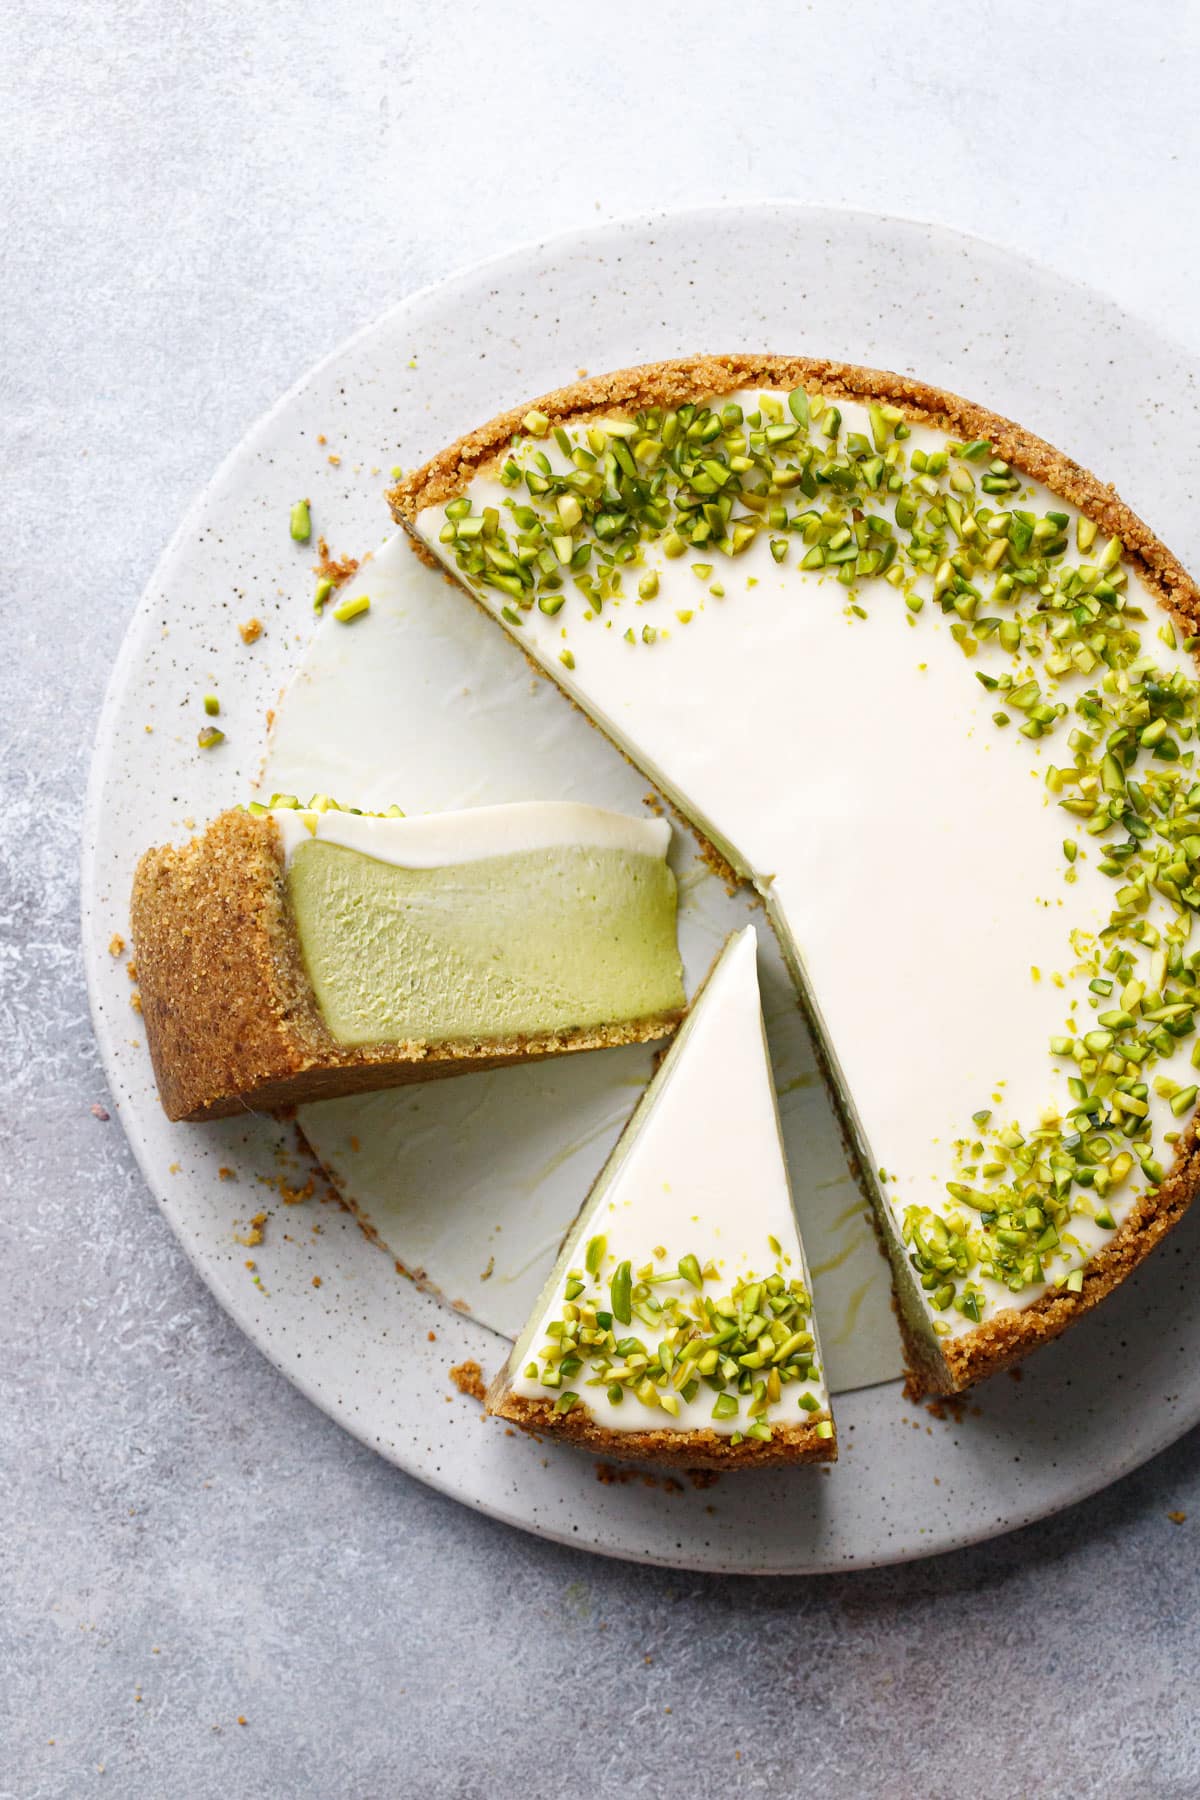 Overhead, slices of Pistachio Sour Cream Cheesecake, one on its side to show the green pistachio filling and sour cream layers.